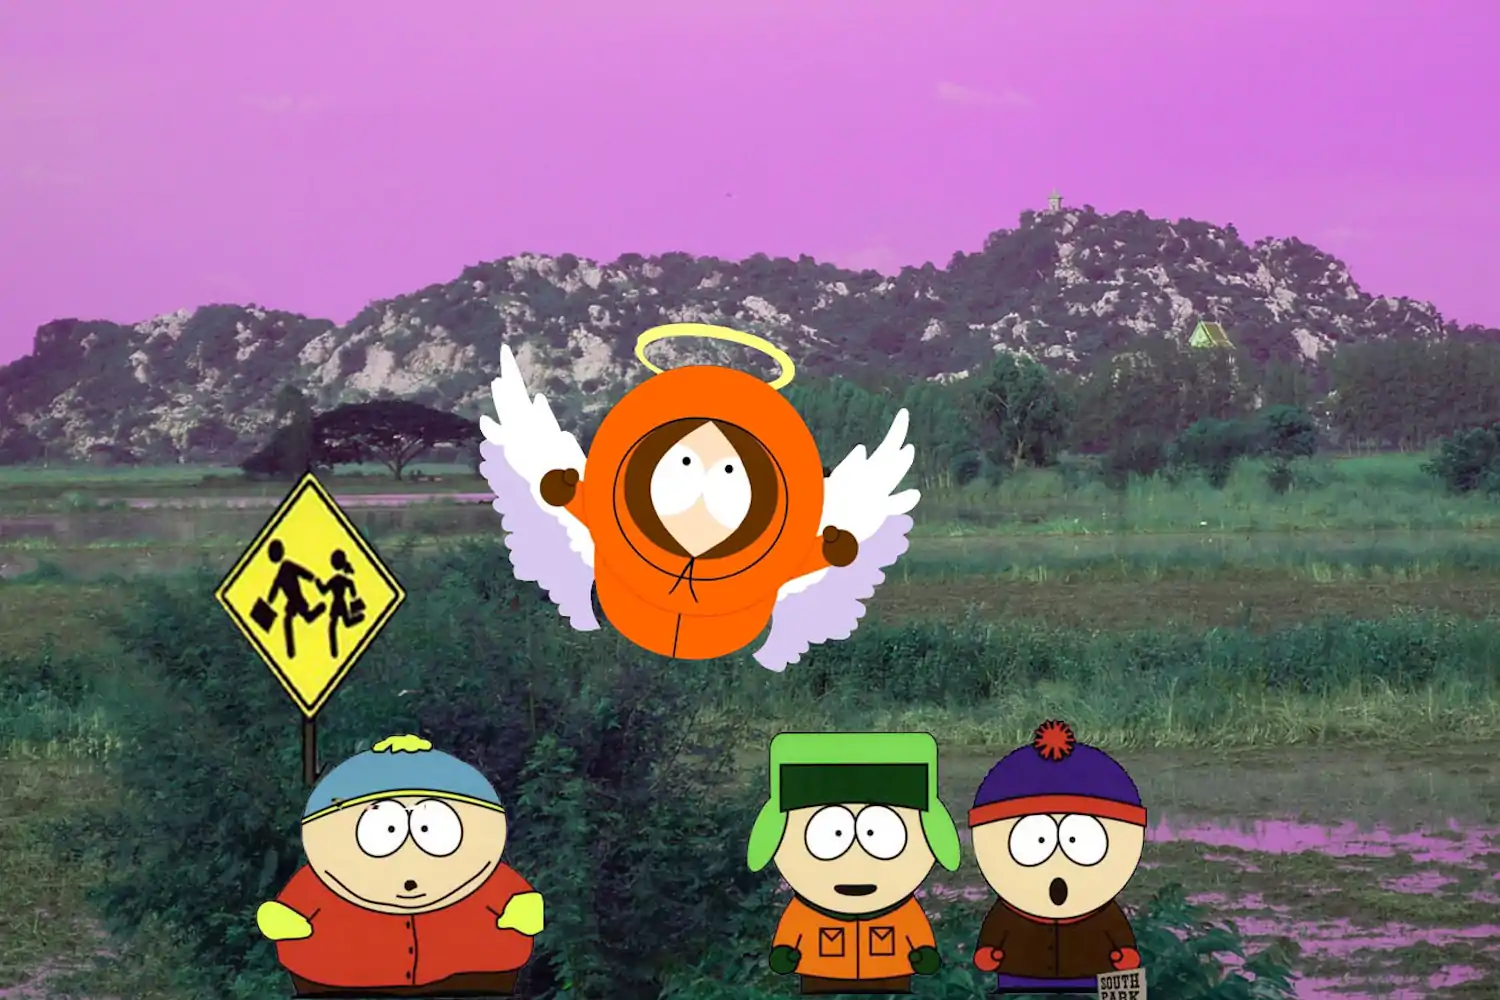 South Park's Cartman, Kyle, and Stan bid adieu to Kenny as he ascends to heaven